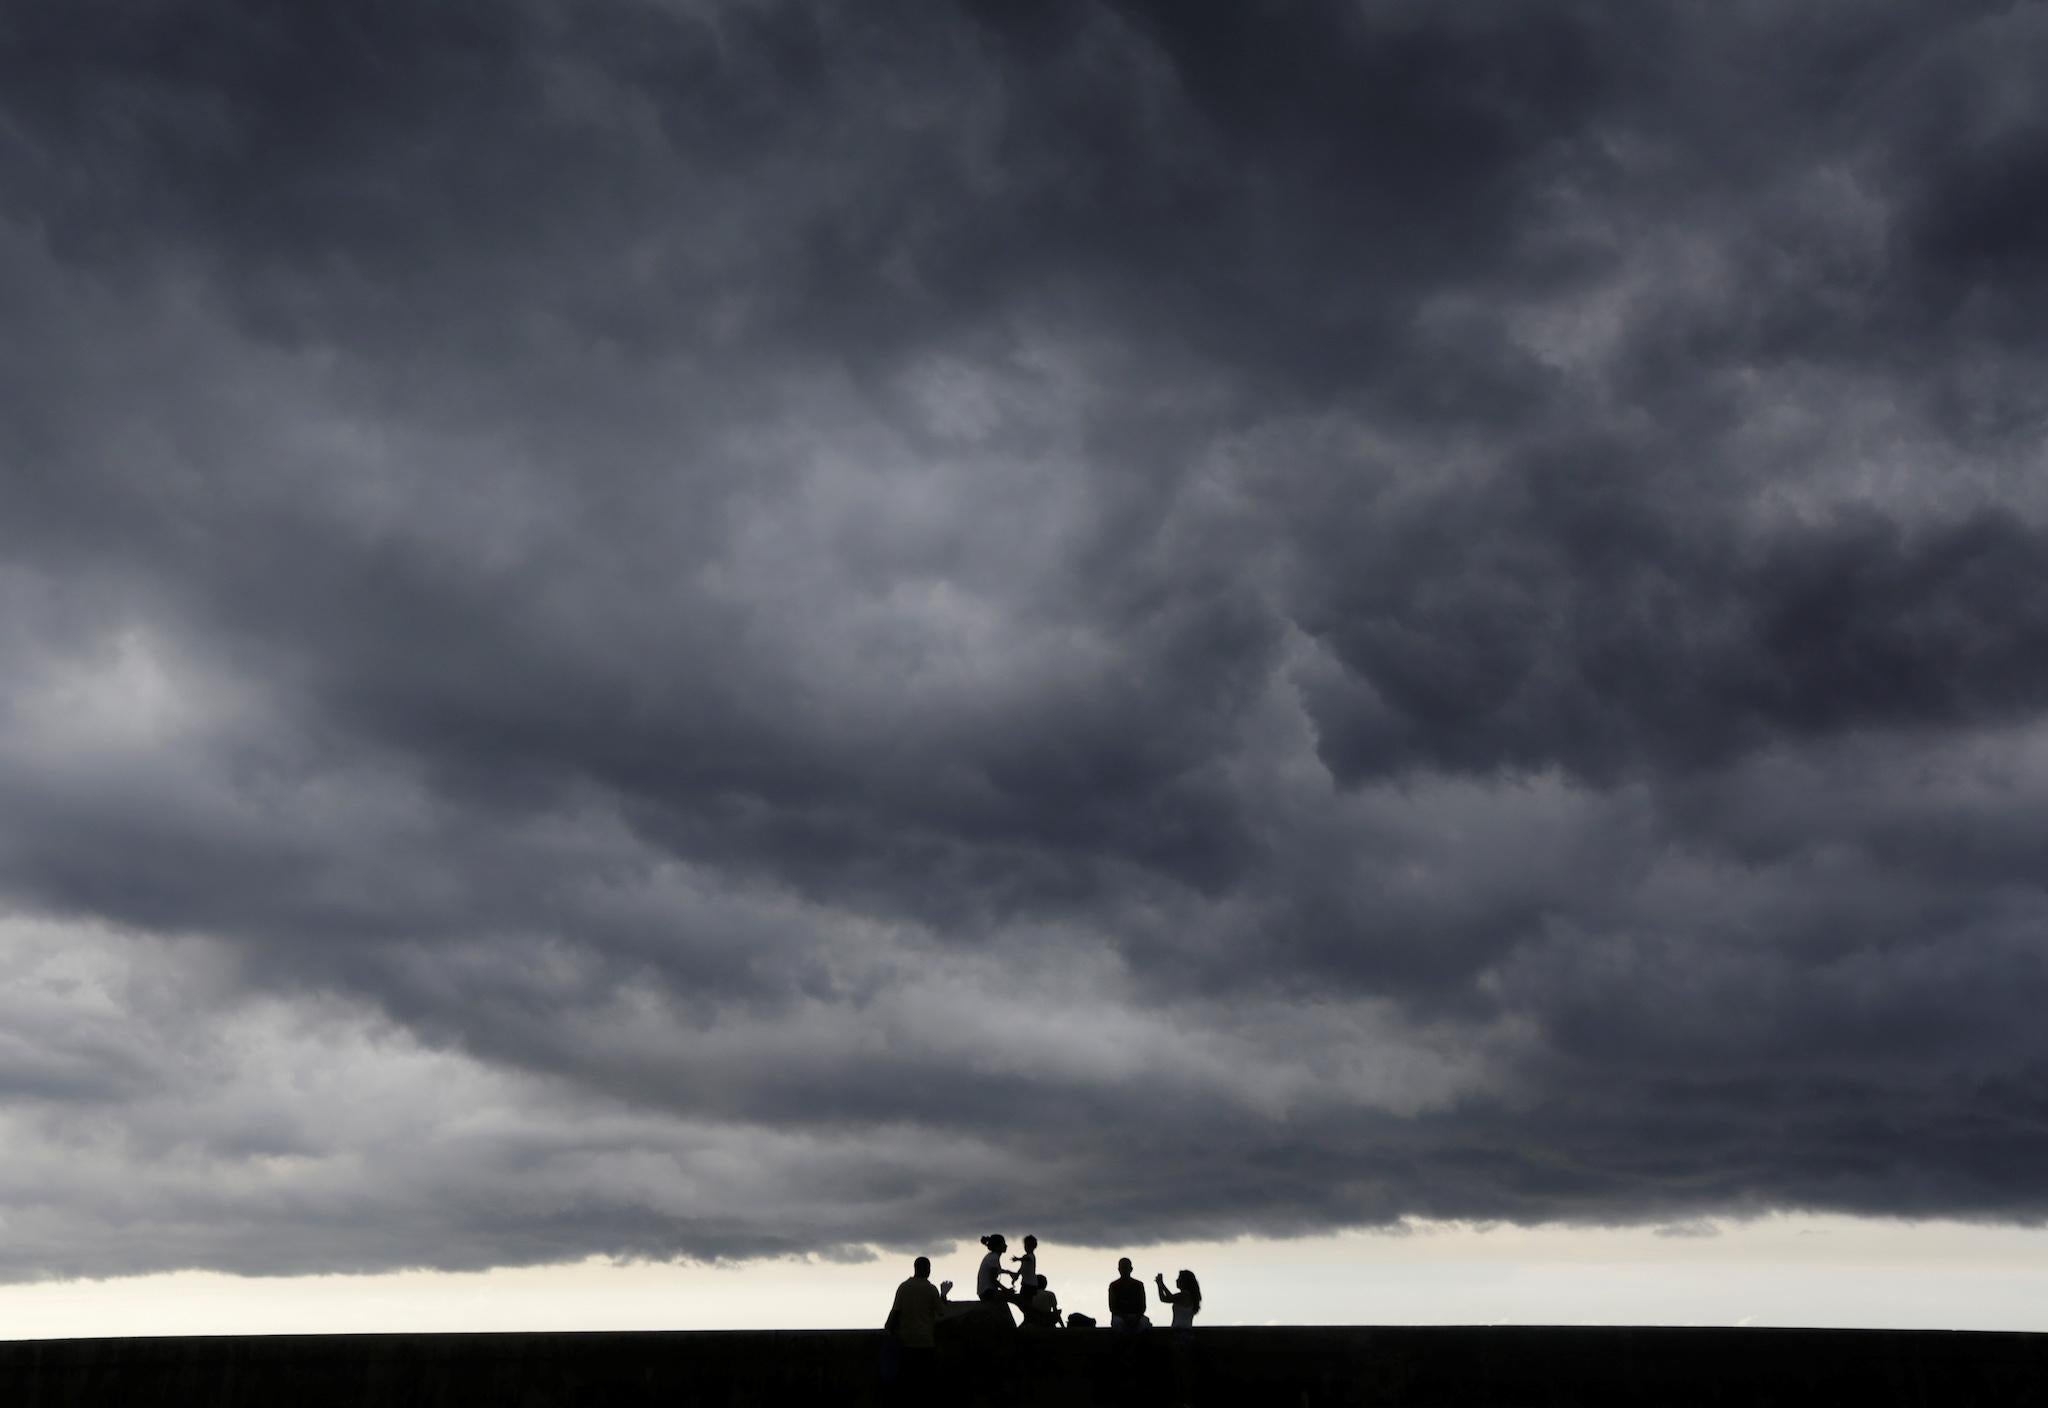 Storm clouds are seen in the sky as people sit on Havana's seafront boulevard El Malecon, Cuba